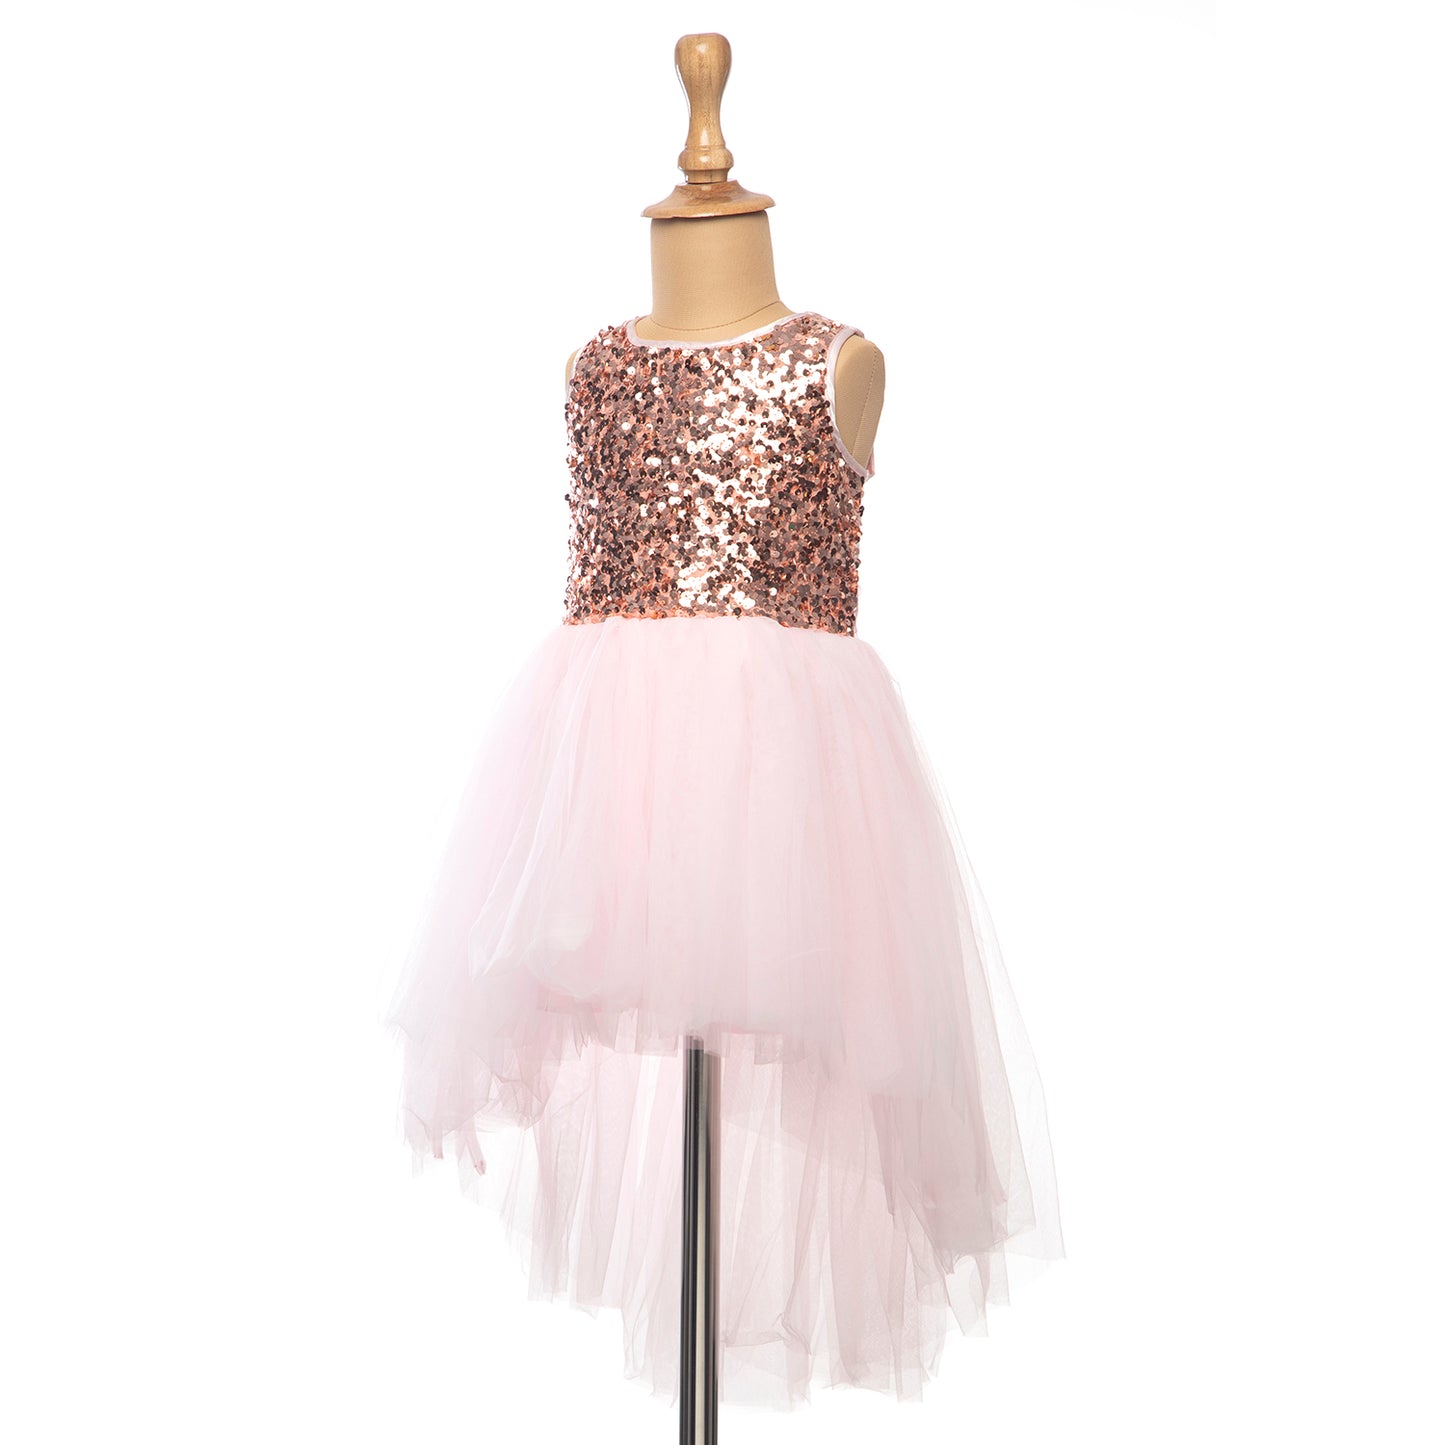 Candy Pink Glitter High Low Style Dress. Perfect for Birthday Parties, Flower Girls.